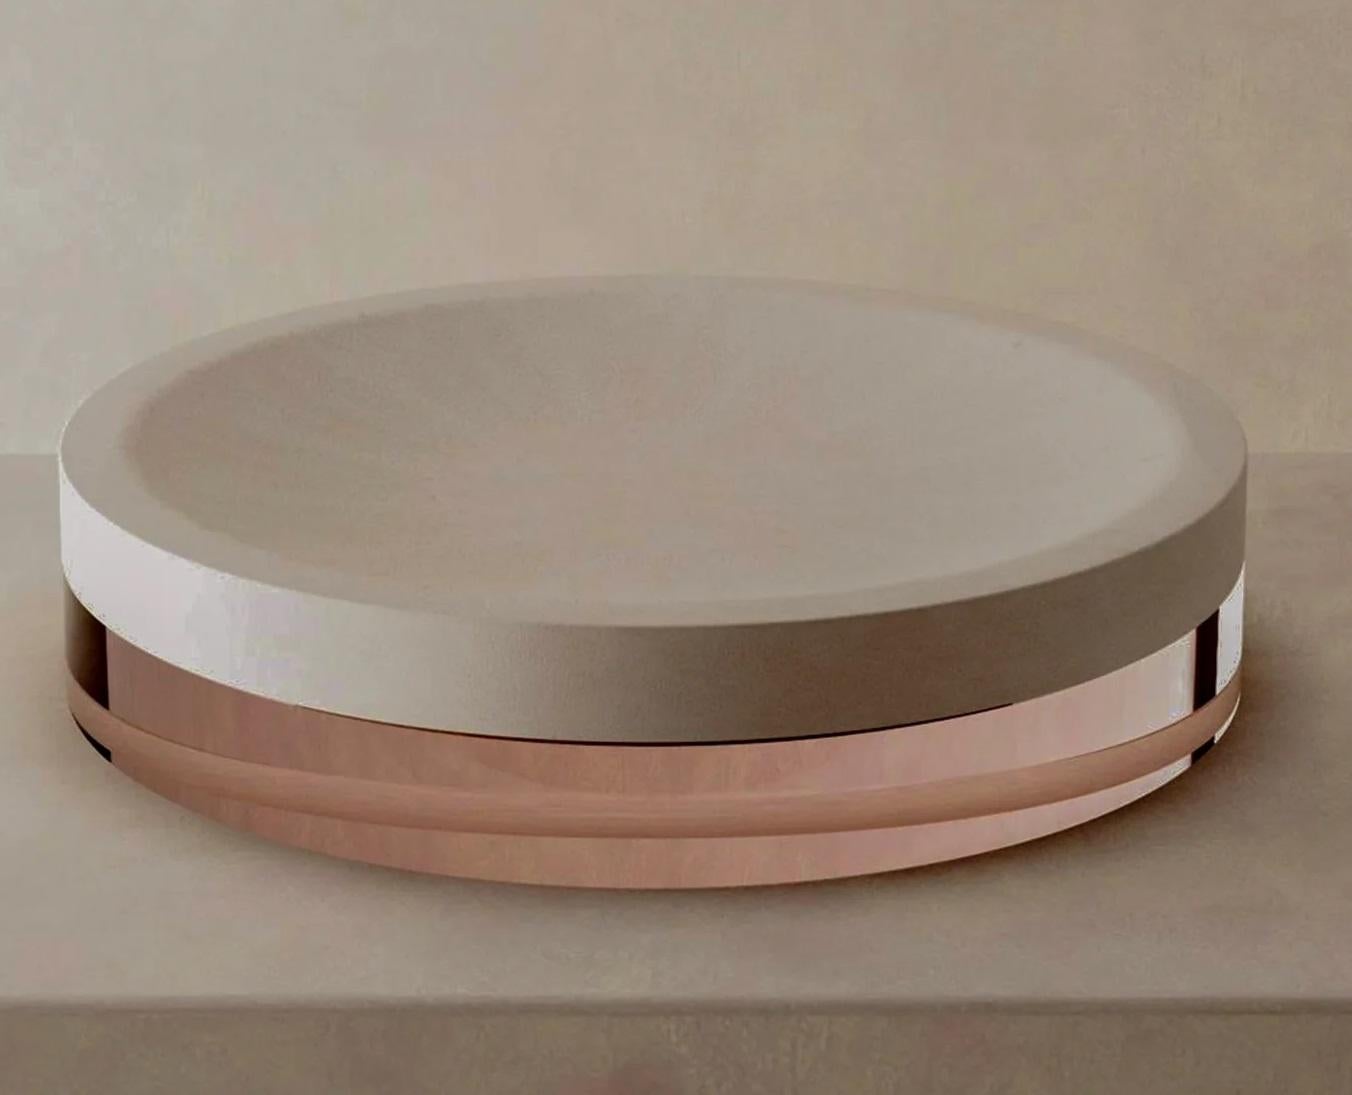 Vano Model 1 Pink Tray by Eter Design
Unique Piece.
Dimensions: Ø 6.8 x H 33 cm.
Materials: Clay.

Sustainable - Eco-friendly. Handmade. Each piece may vary slightly in color, size, texture and shape. Also available in blue. Please contact